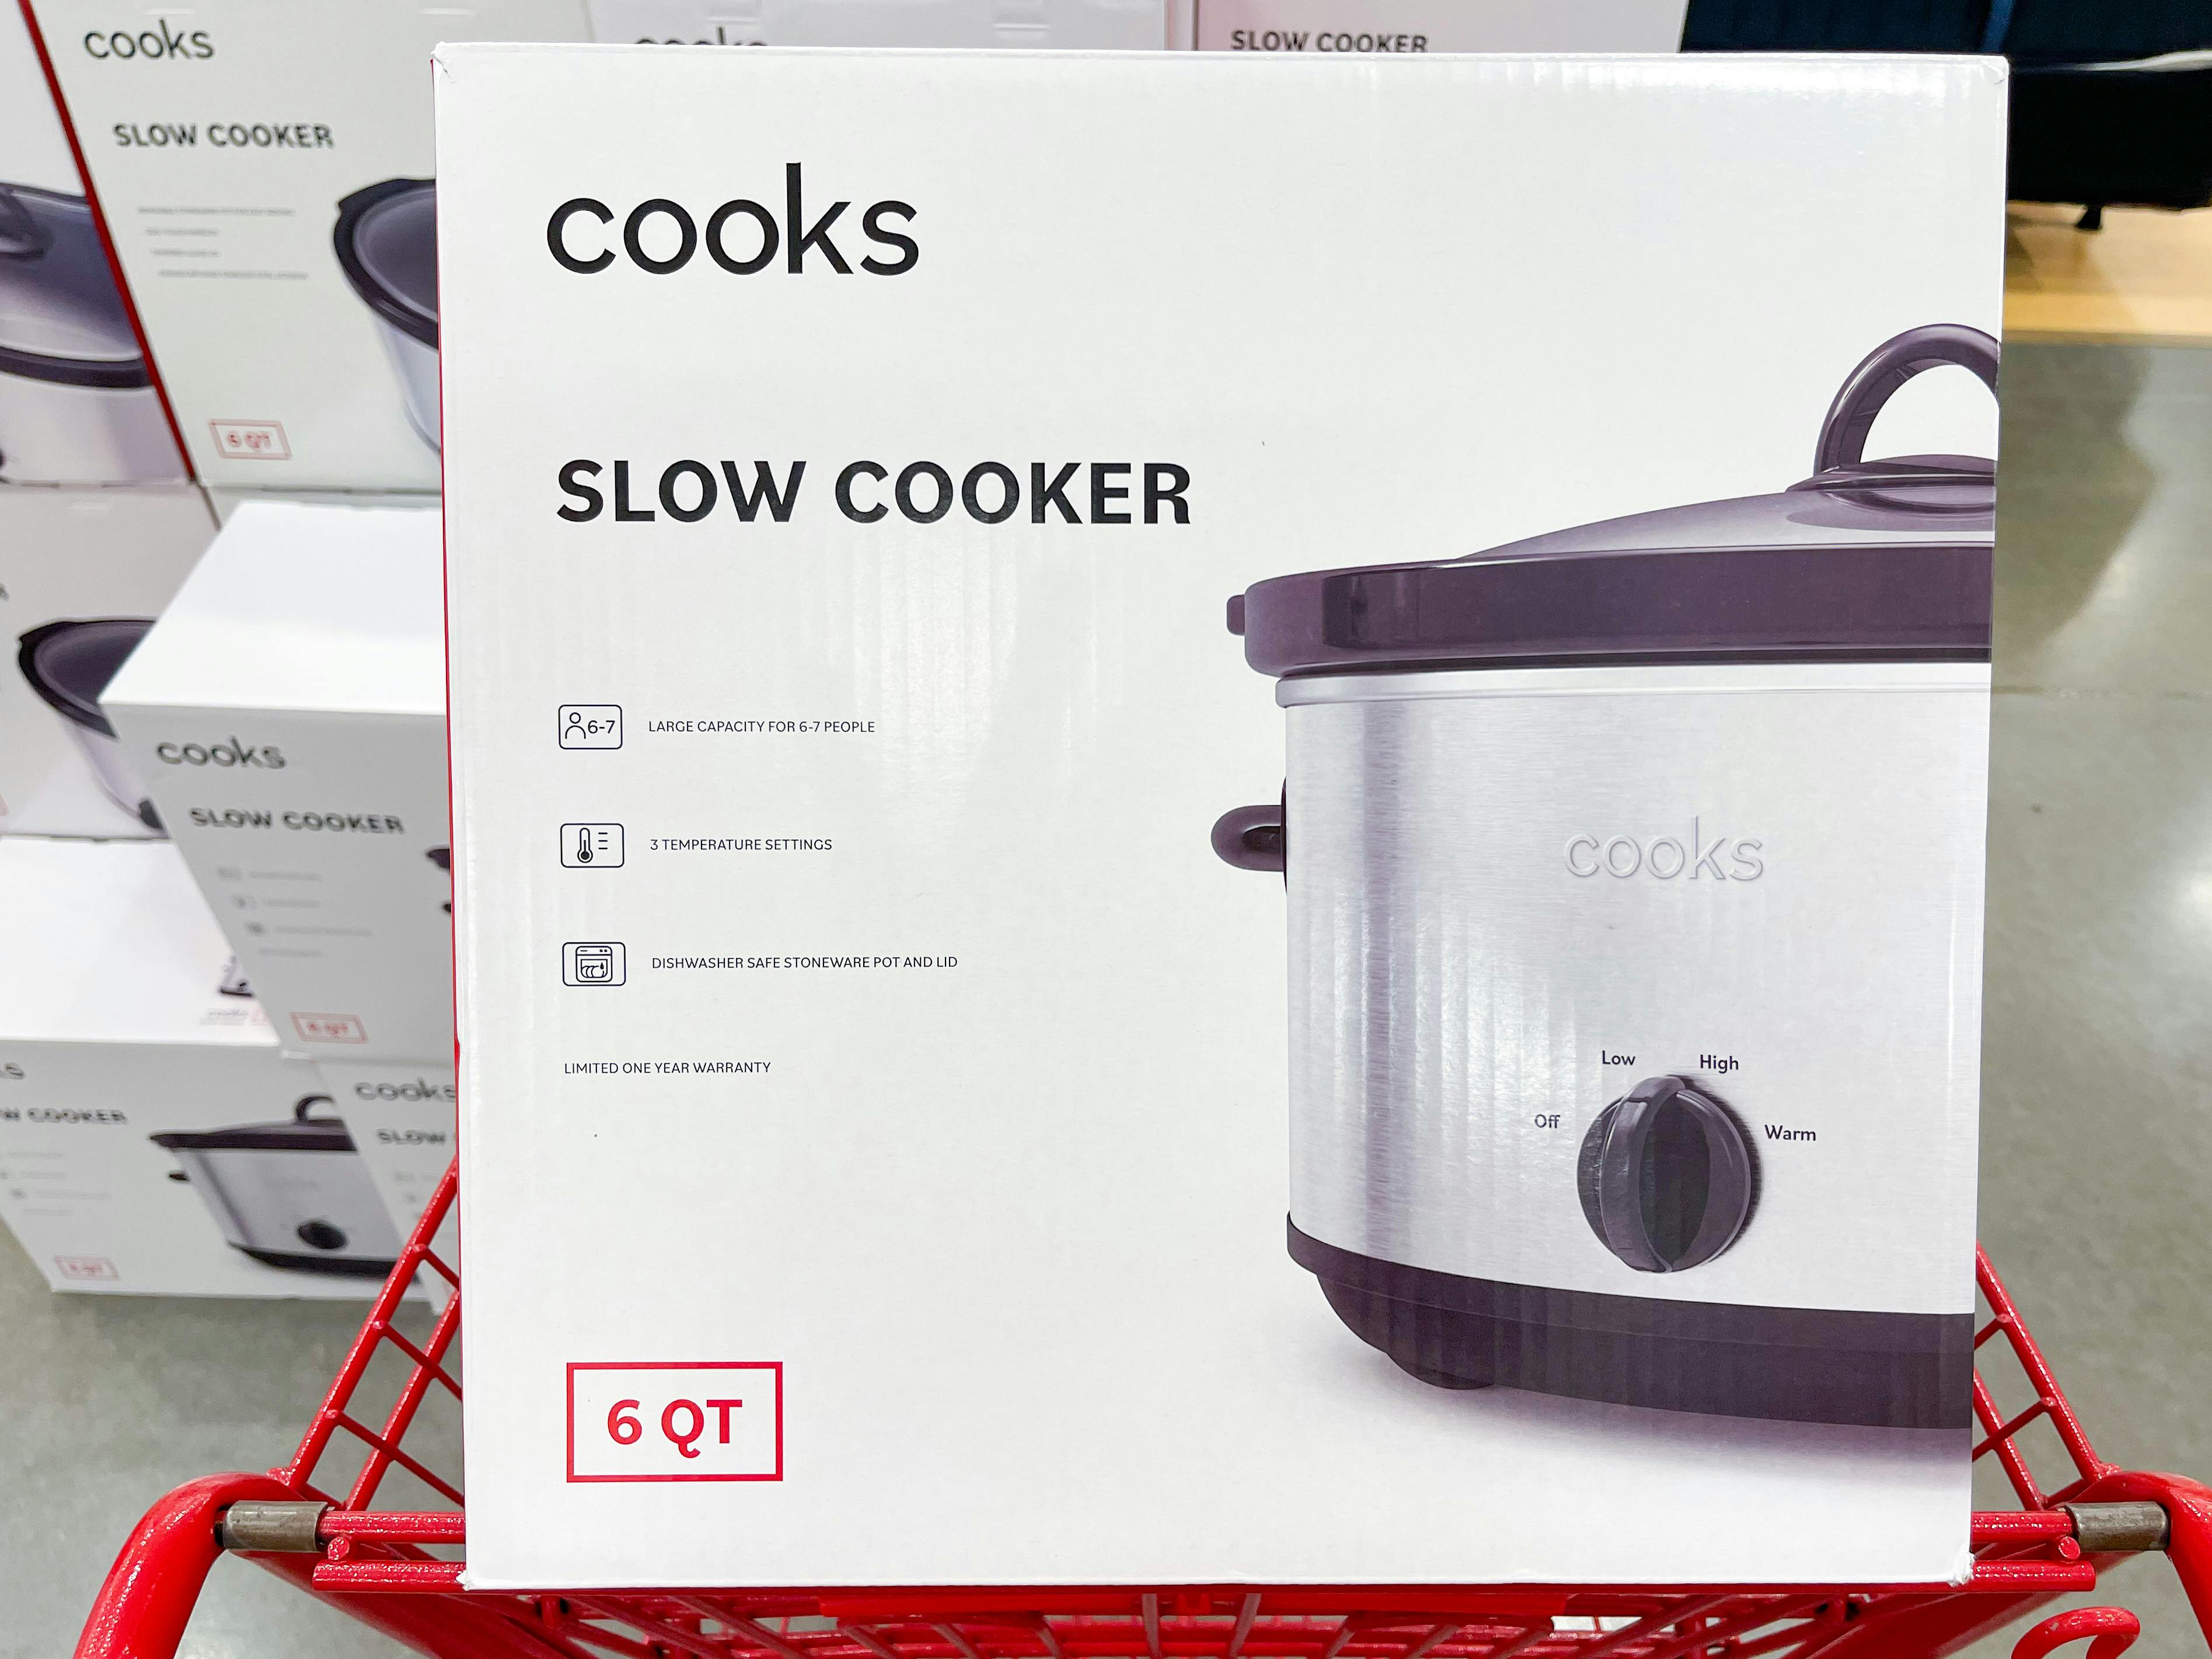 electric-kettle-or-slow-cooker-only-22-49-at-jcpenney-the-krazy